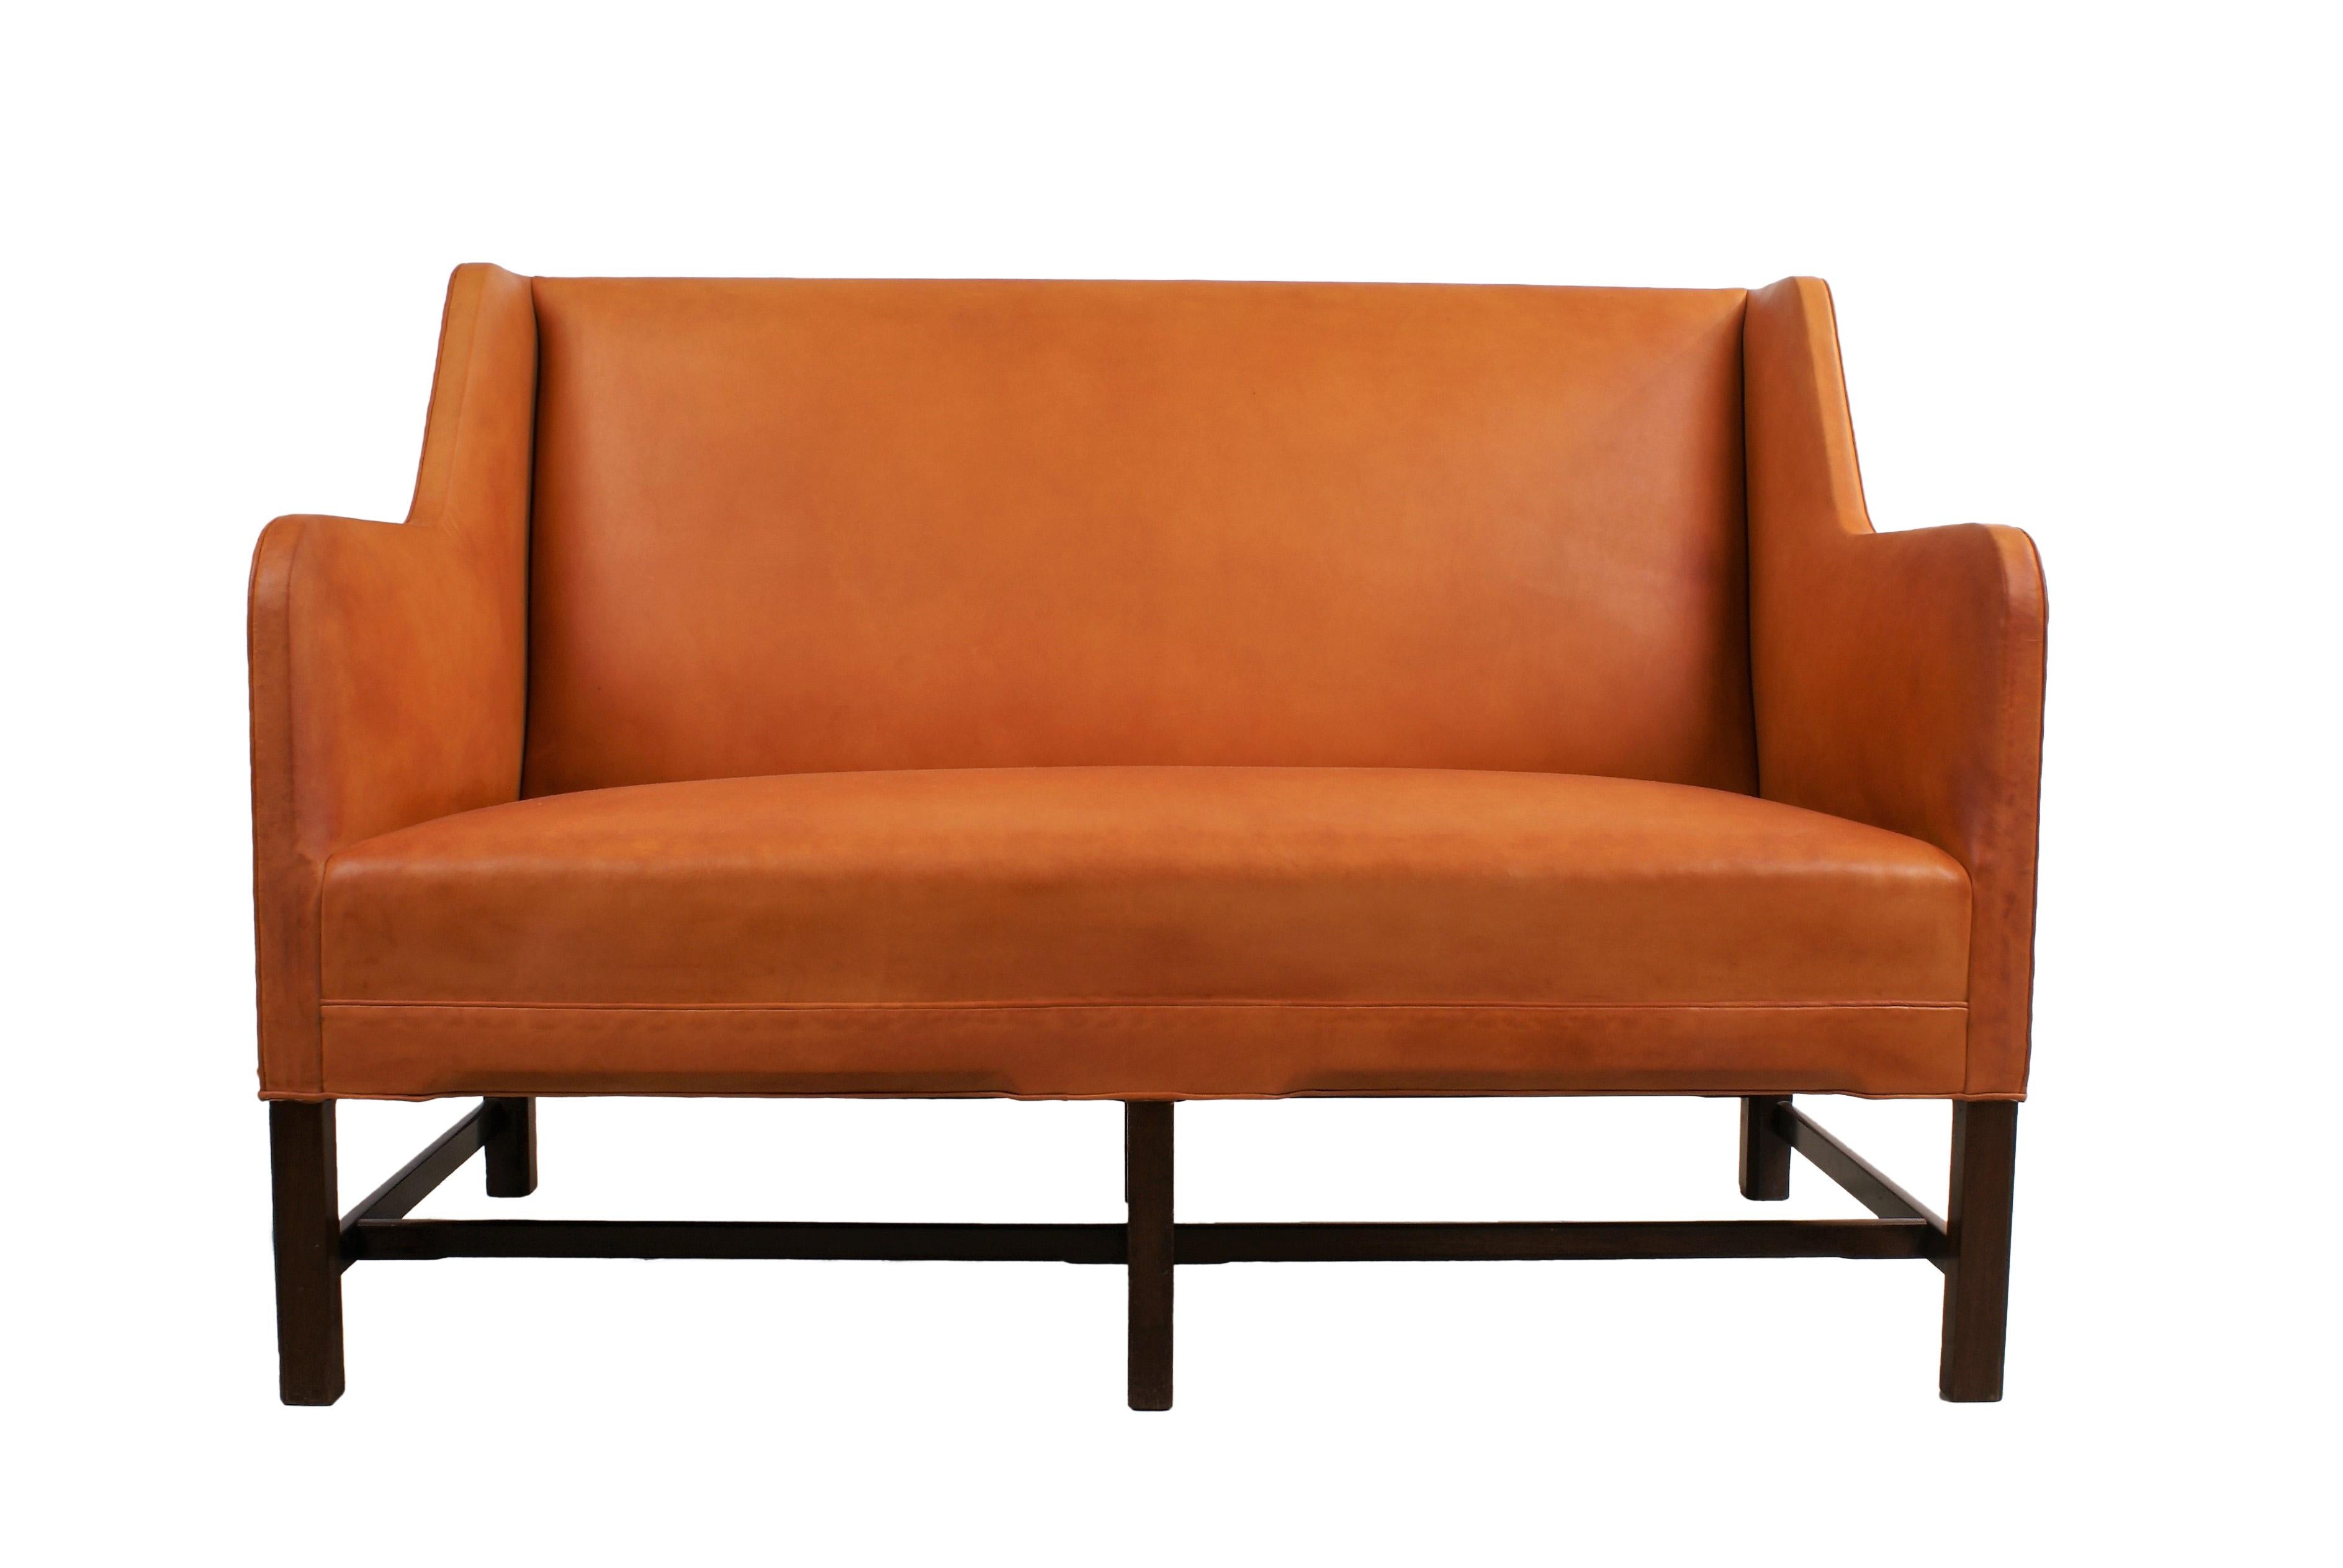 Kaare Klint, two-seat settee with six-legged Cuban mahogany frame. Sides, seat and back re-upholstered with natural leather. Model 5011. Made by Rud. Rasmussen Cabinetmakers, Copenhagen, Denmark.

Literature: Gorm Harkaer, Klintiana: “Kaare